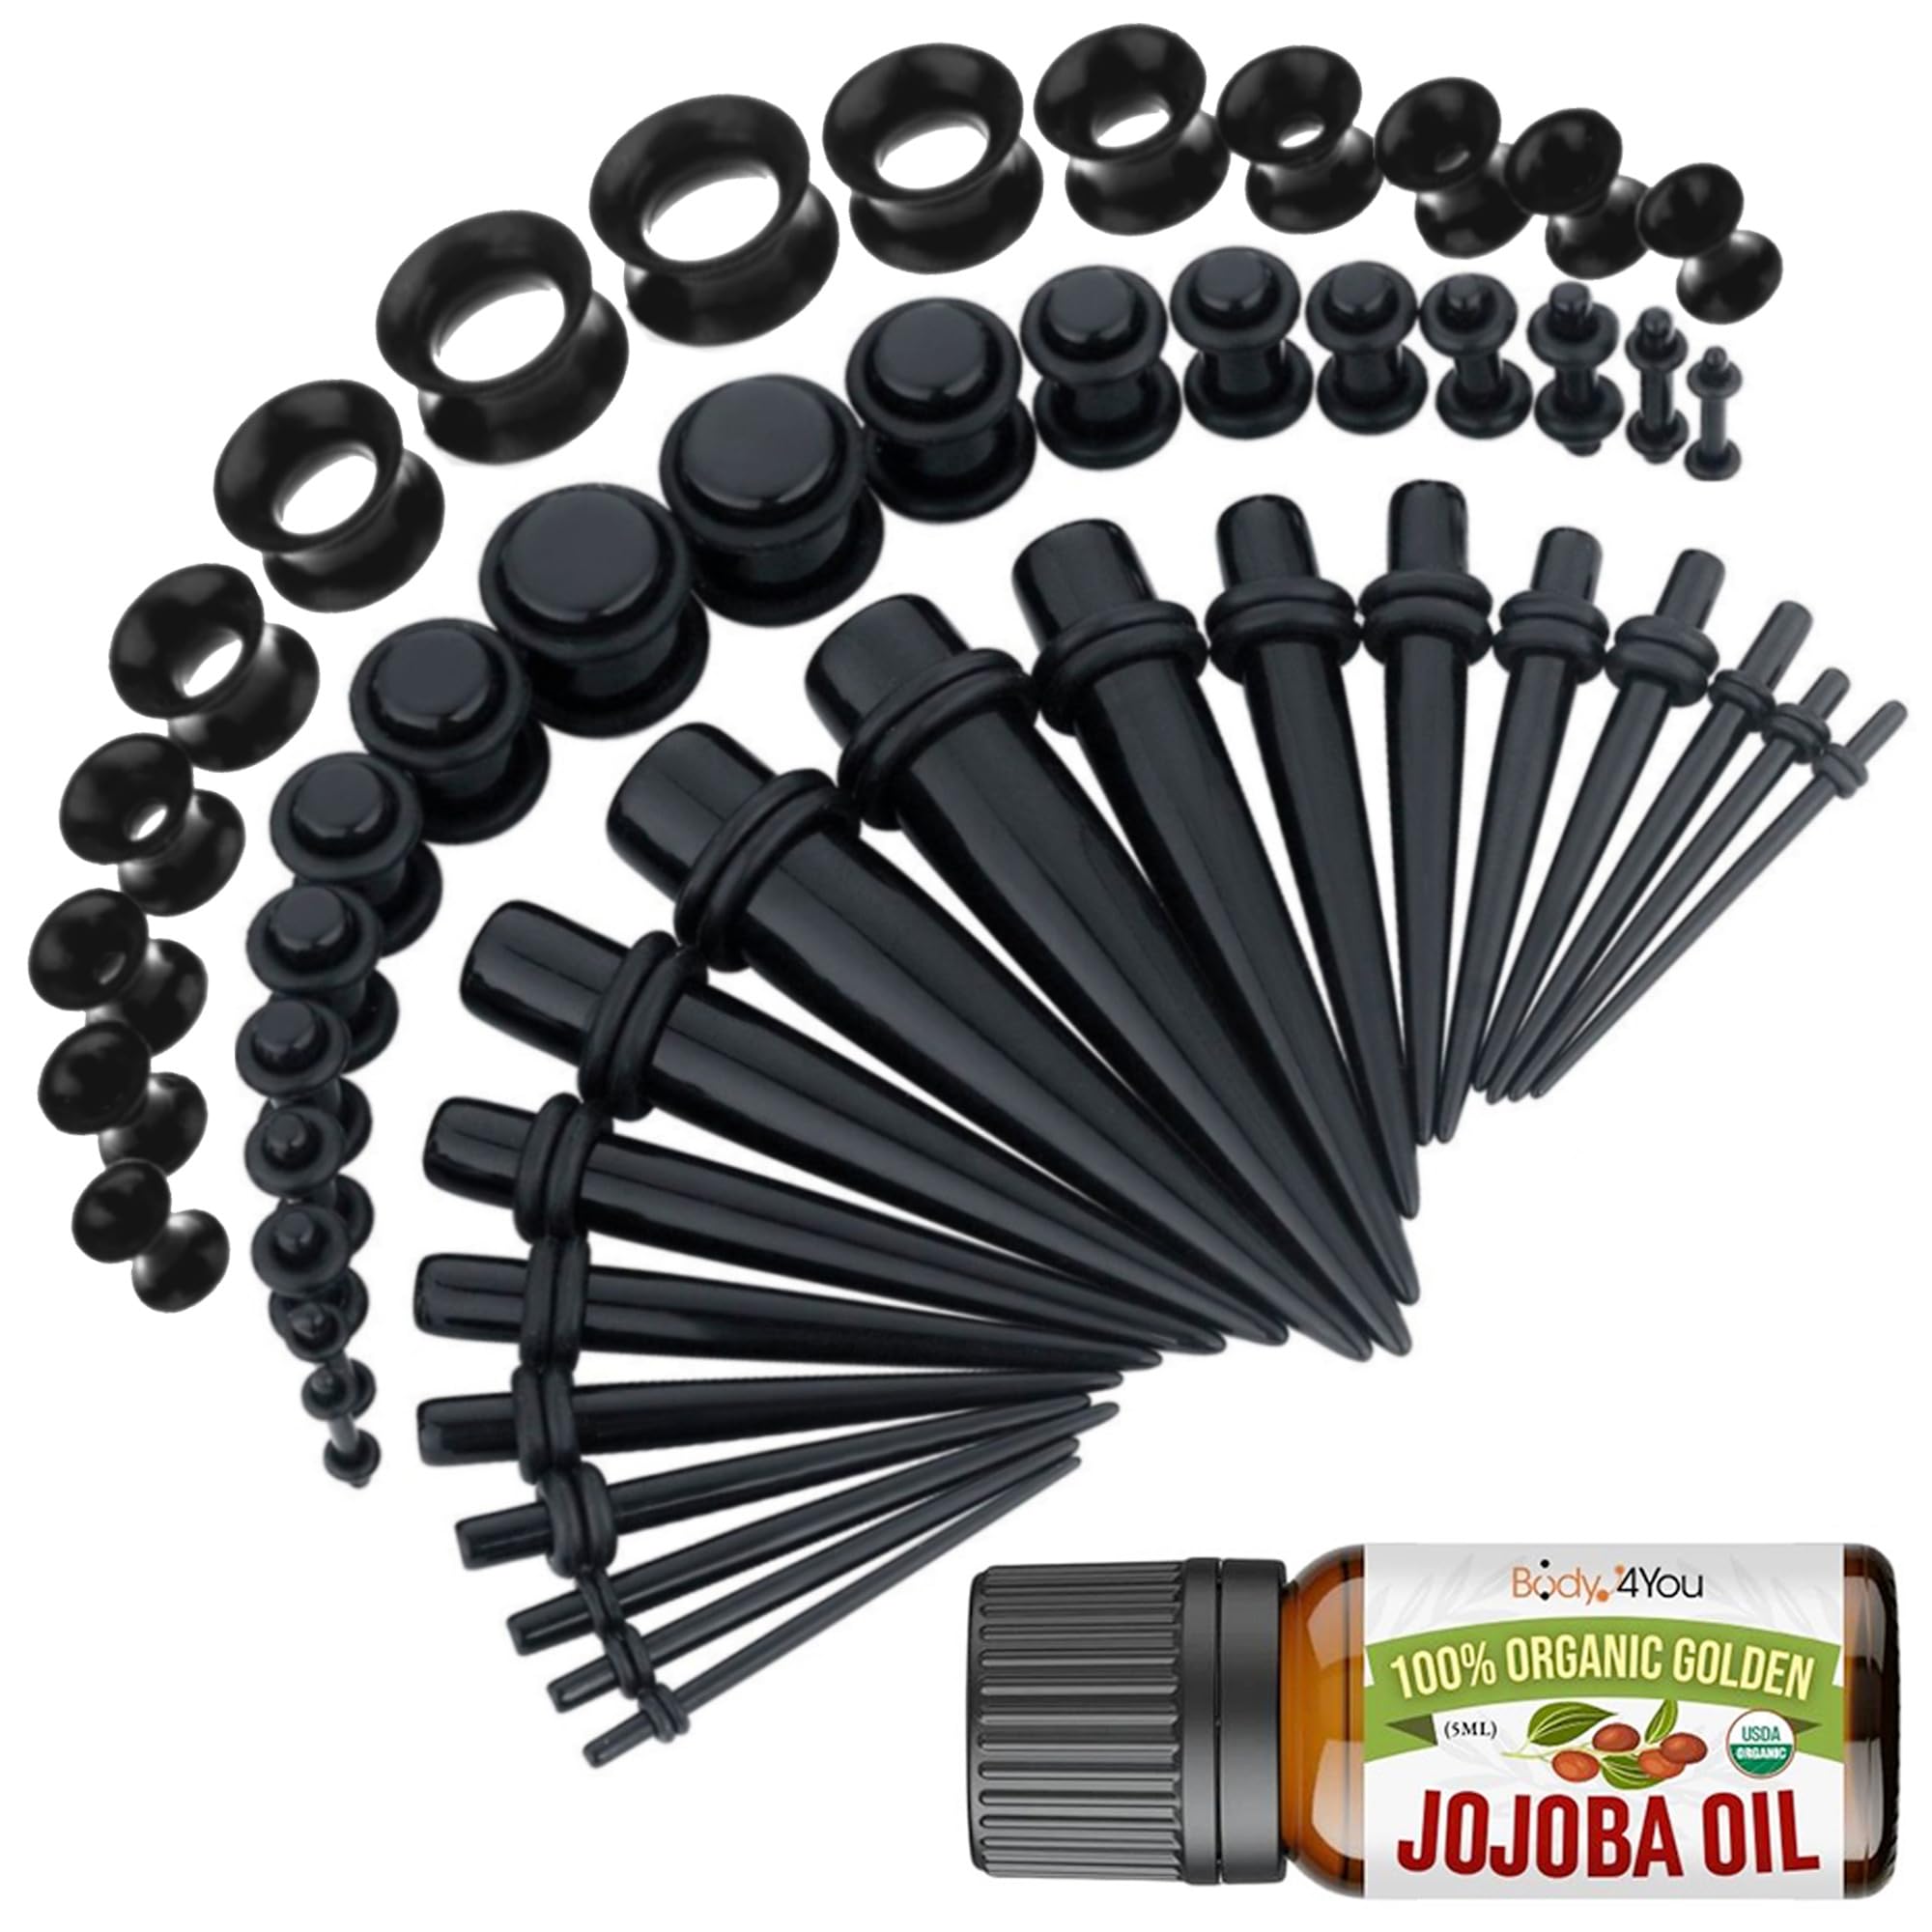 BodyJ4You 54PC Ear Stretching Kit 14G-12mm - Aftercare Jojoba Oil - Acrylic Plugs Gauge Tapers Silicone Tunnels - Lightweight Expanders Men Women